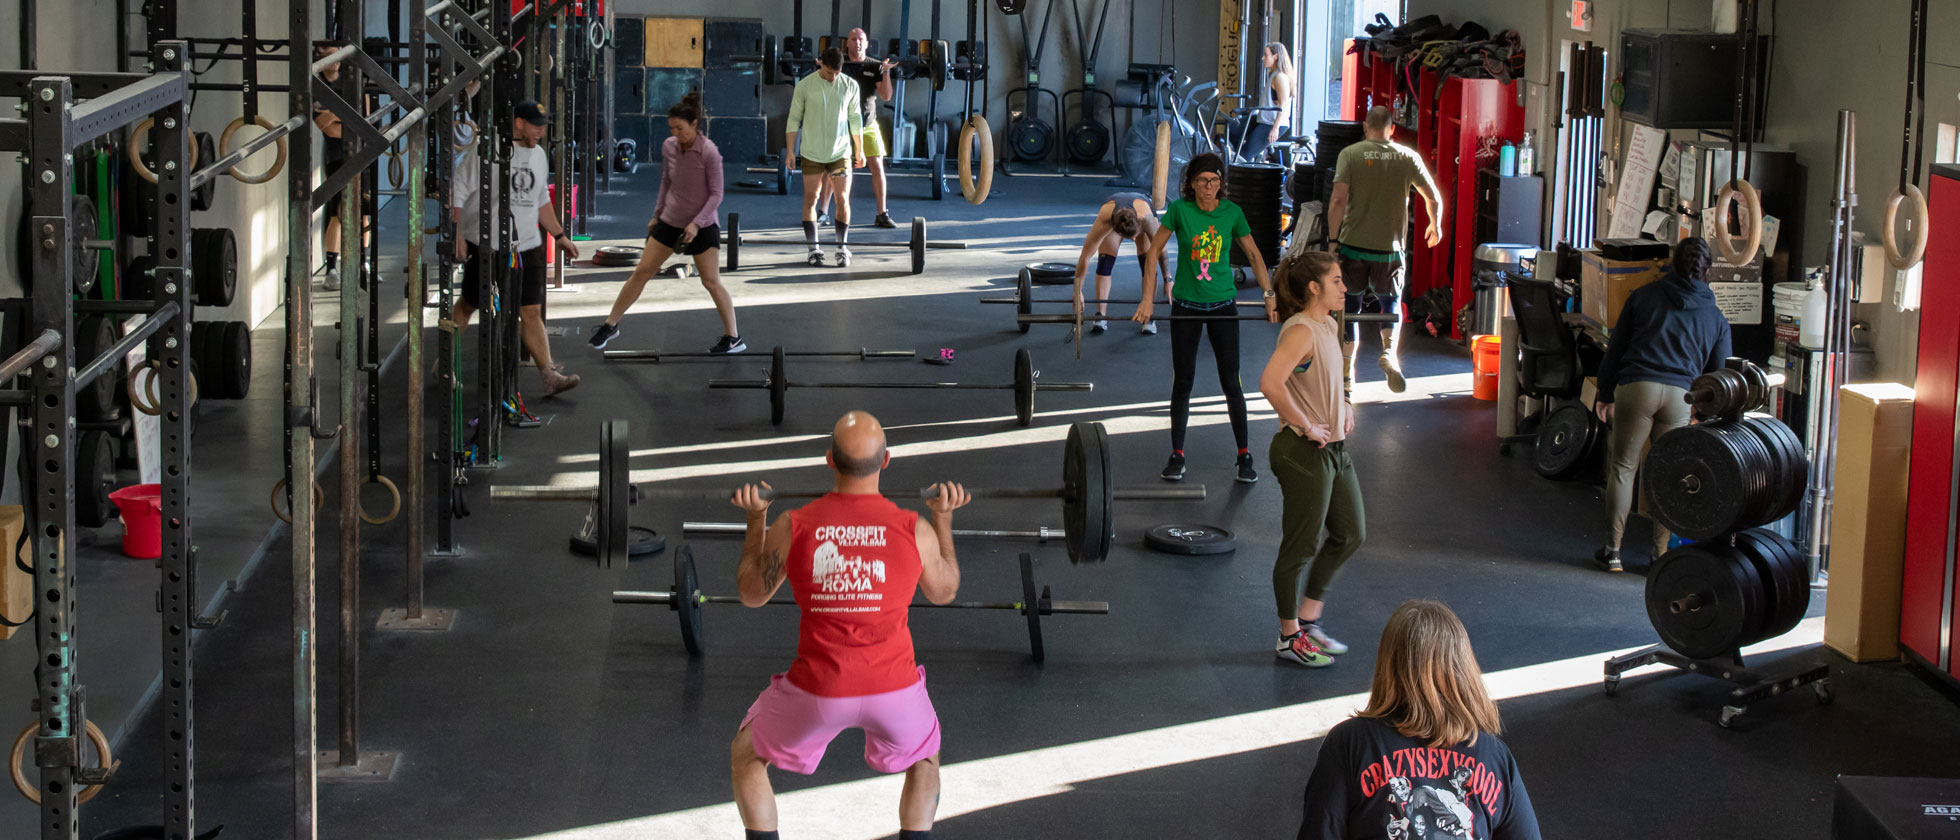 Top 5 Best CrossFit Gyms To Join Near San Marco